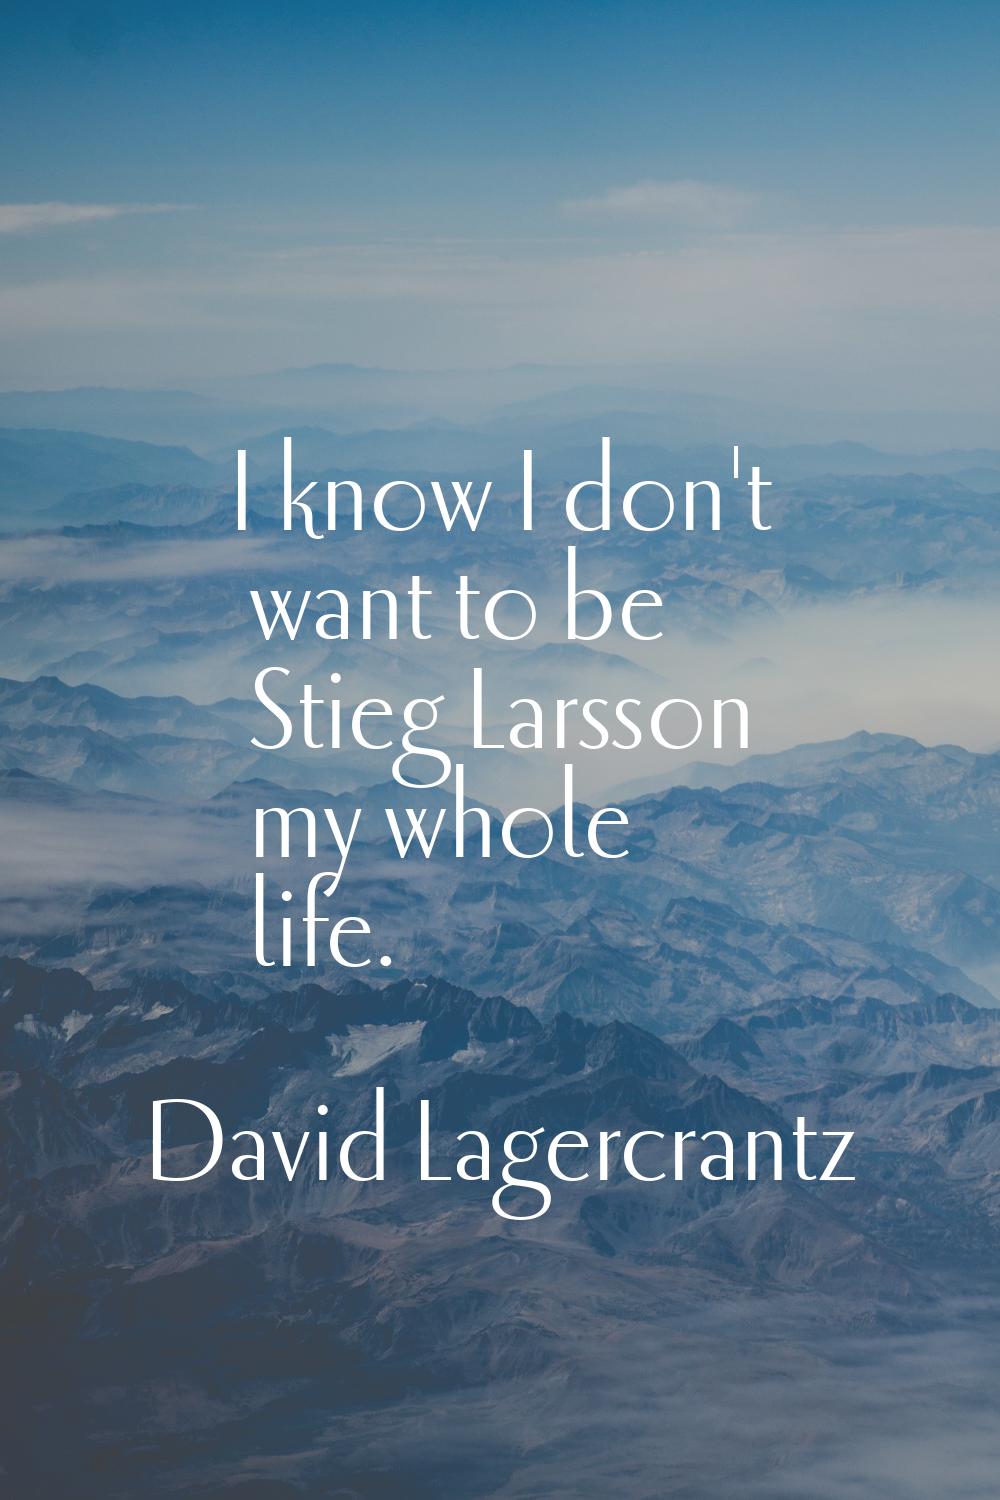 I know I don't want to be Stieg Larsson my whole life.